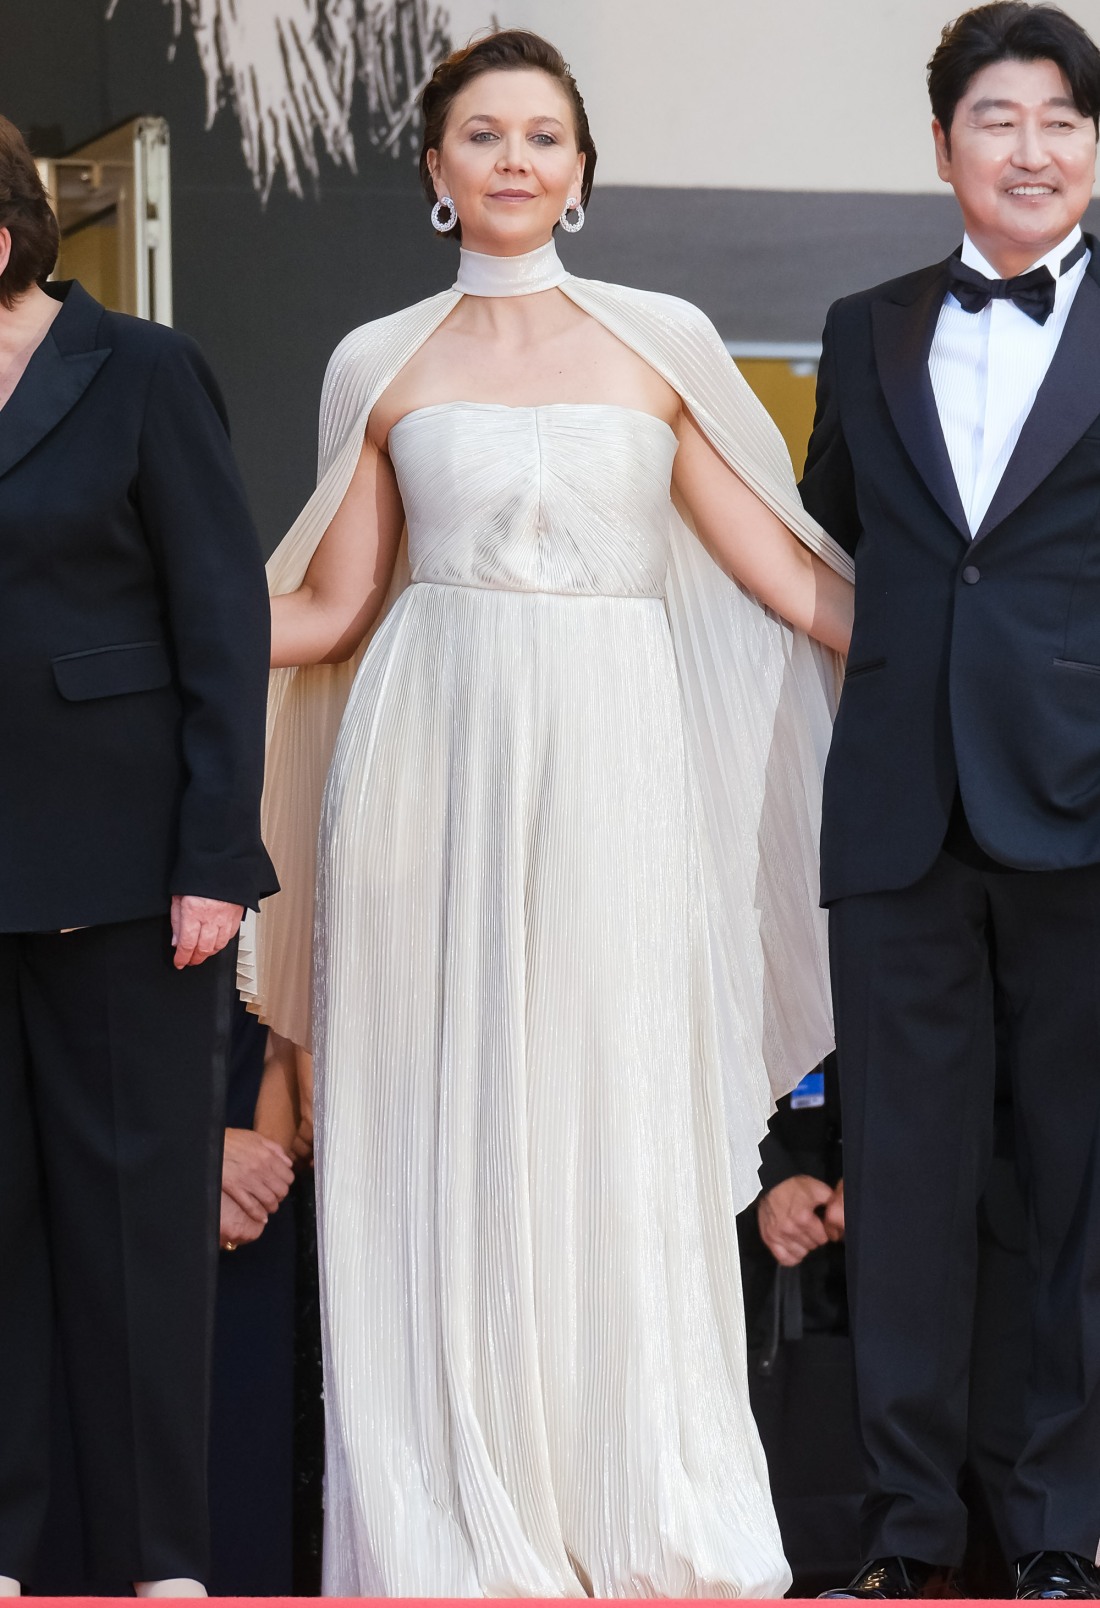 Maggie Gyllenhaal poses at the Red Carpet for the Opening Night Film - Annettee during the 74th Cannes International Film Festival on Tuesday 6 July 2021